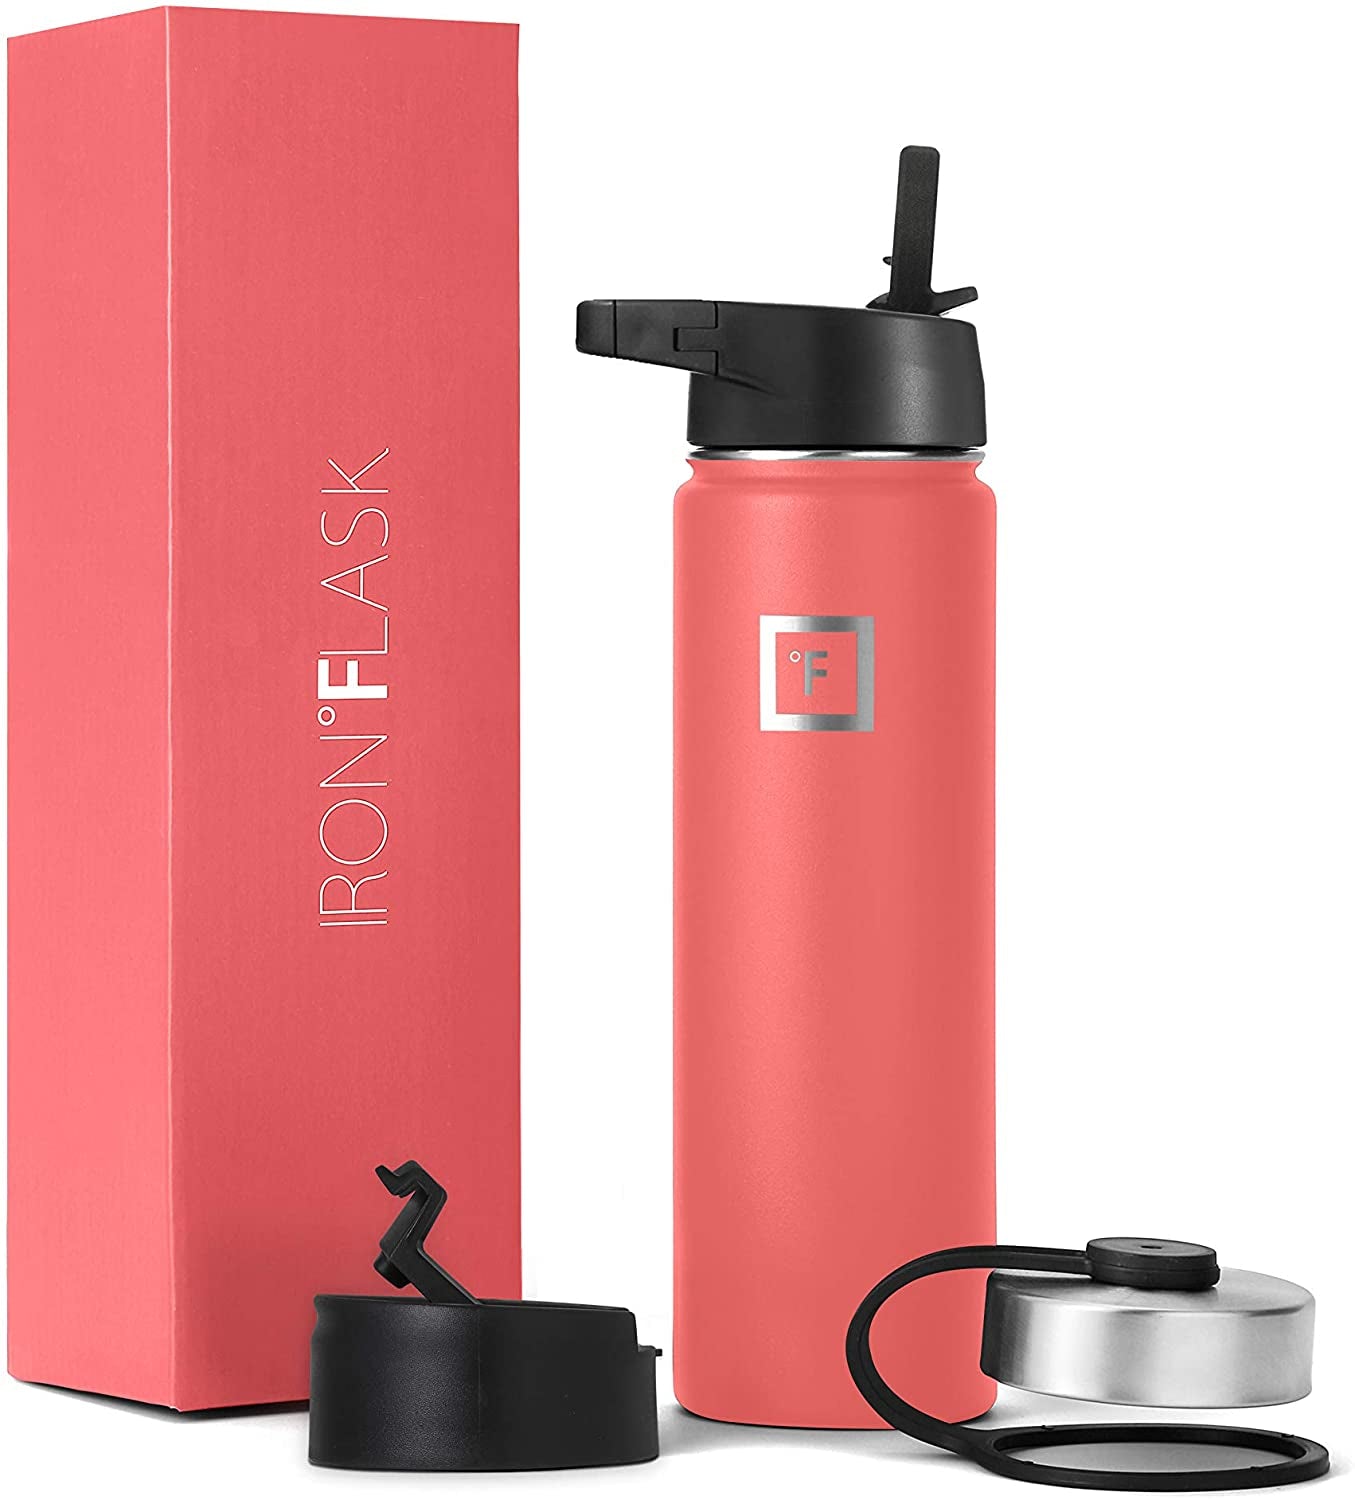 Sports Water Bottle - Wide Mouth with 3 Straw Lids - Stainless Steel Gym & Outdoor Bottles for Men, Women & Kids - Double Walled, Insulated Thermos, Metal Canteen - Peach, 22 Oz